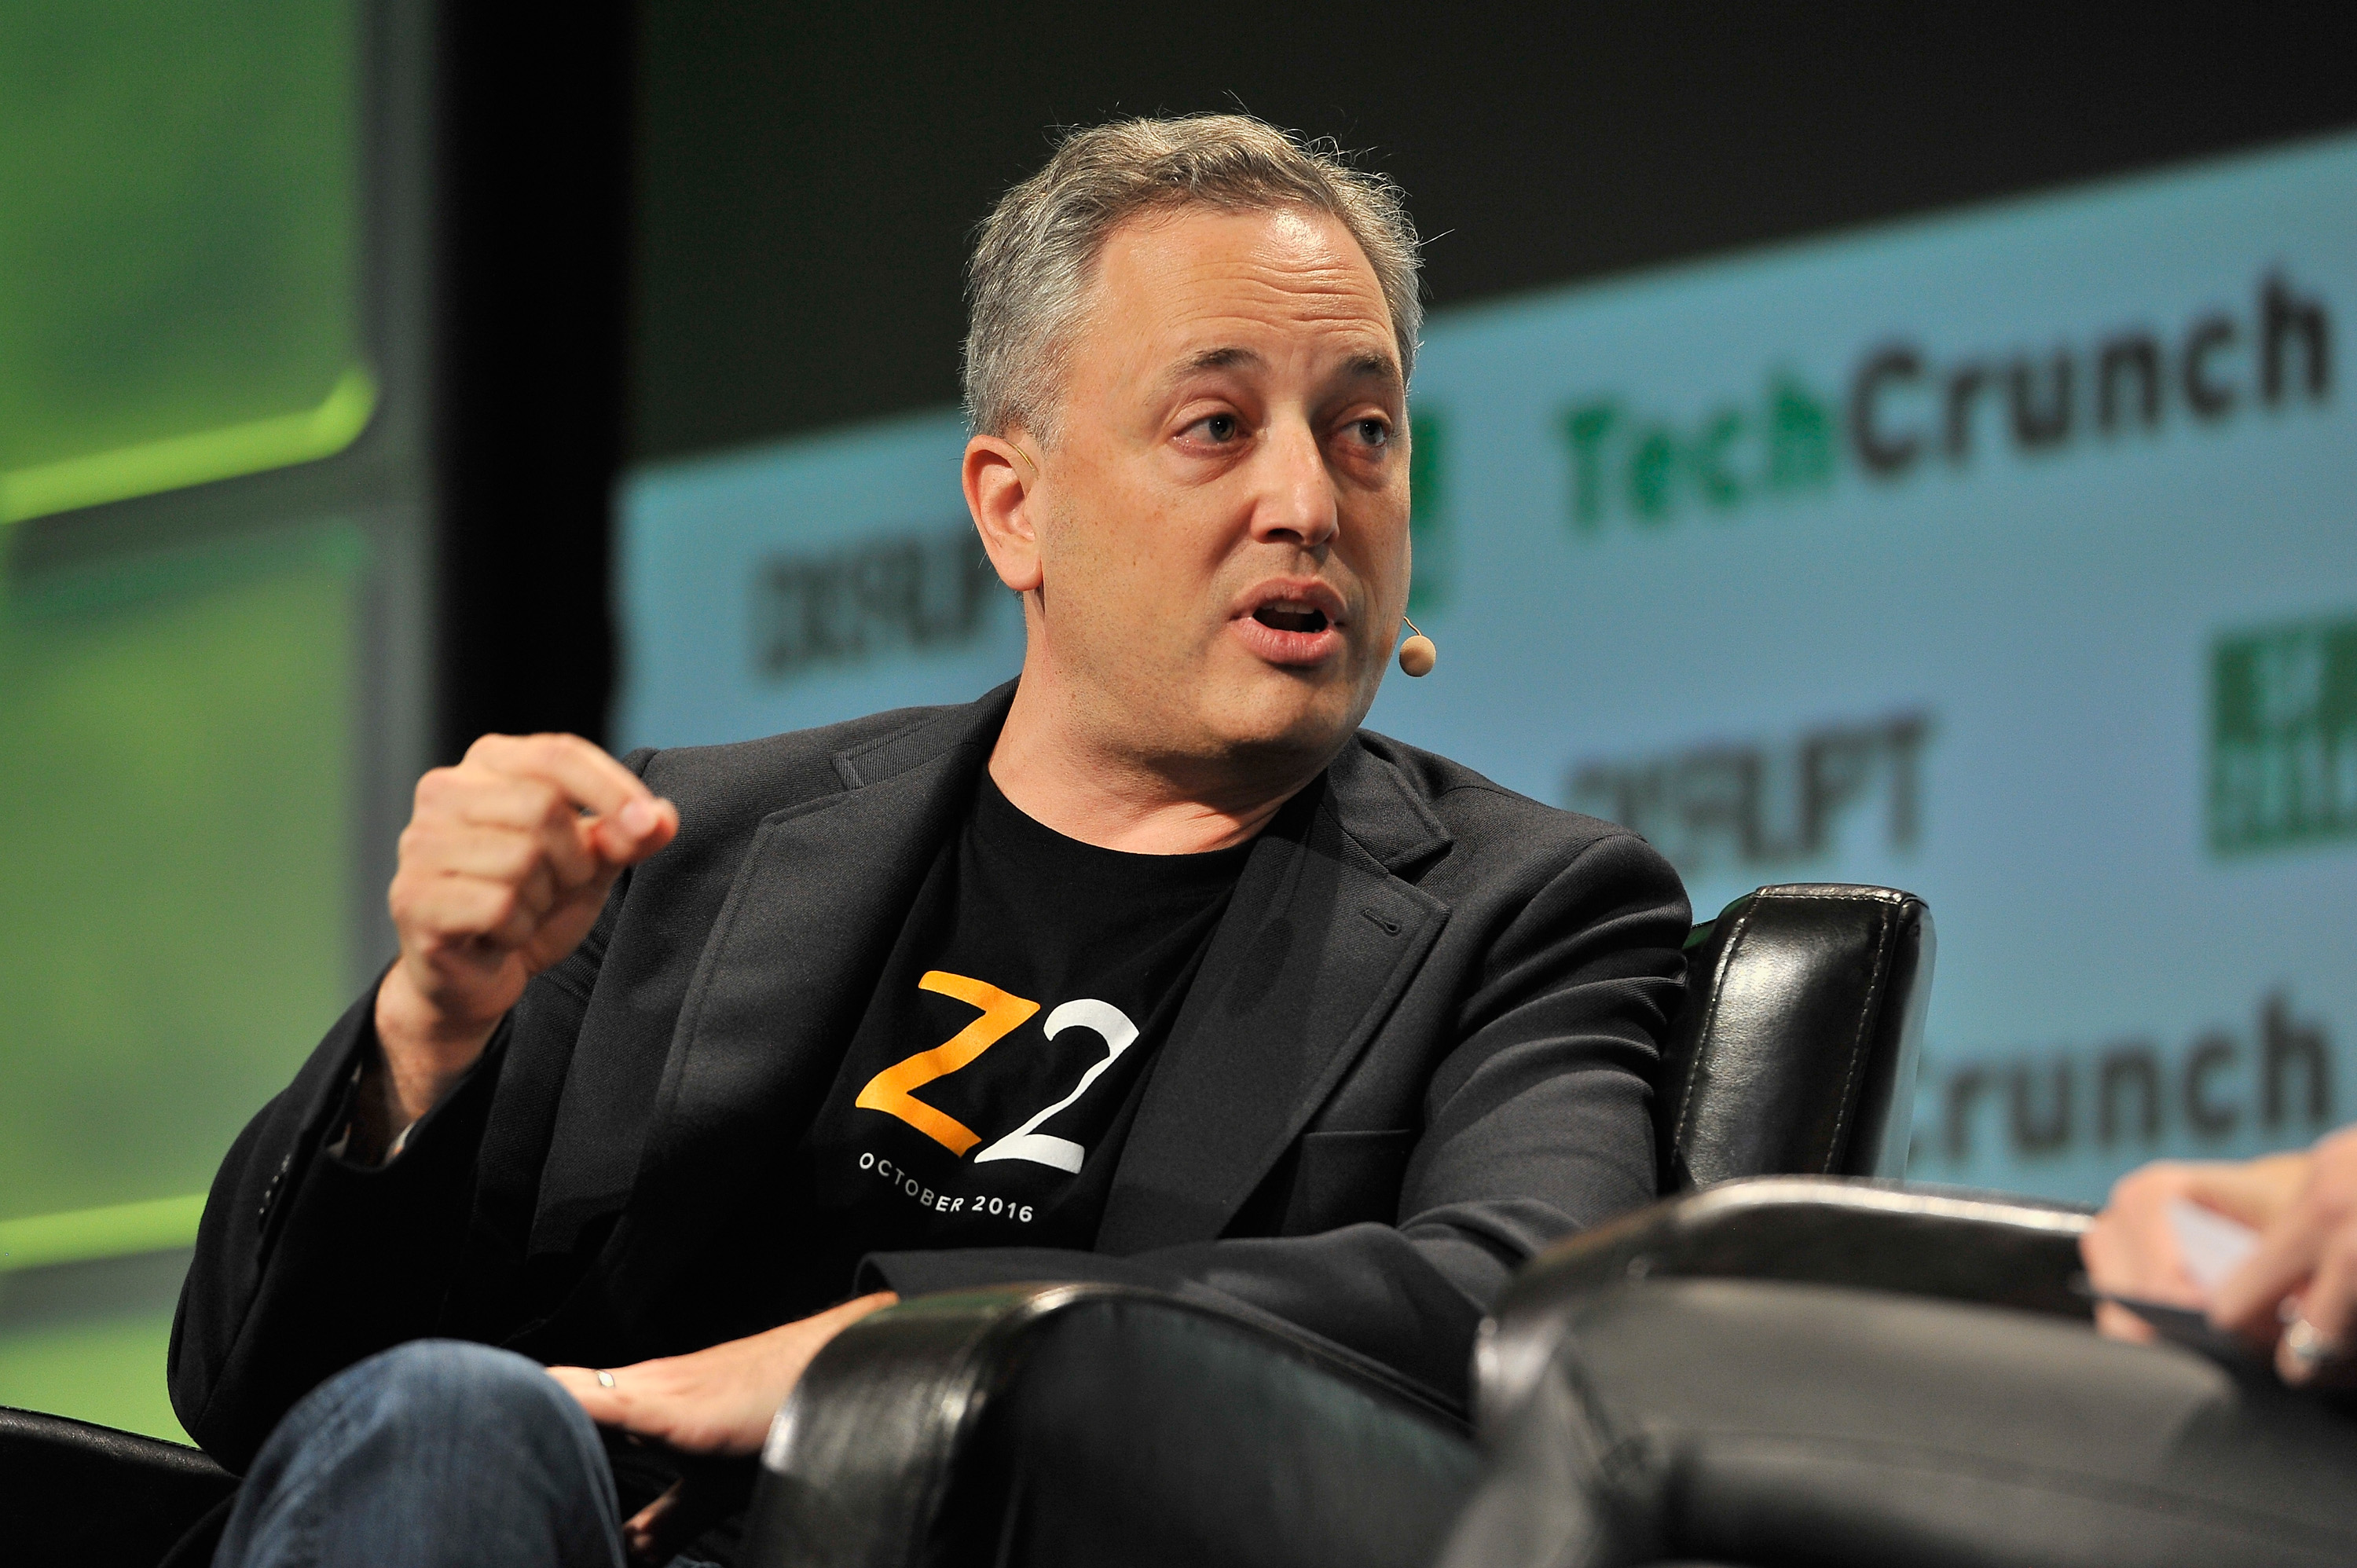 A man in a black blazer with a microphone headset is talking passionately on stage with TechCrunch logos in the background.